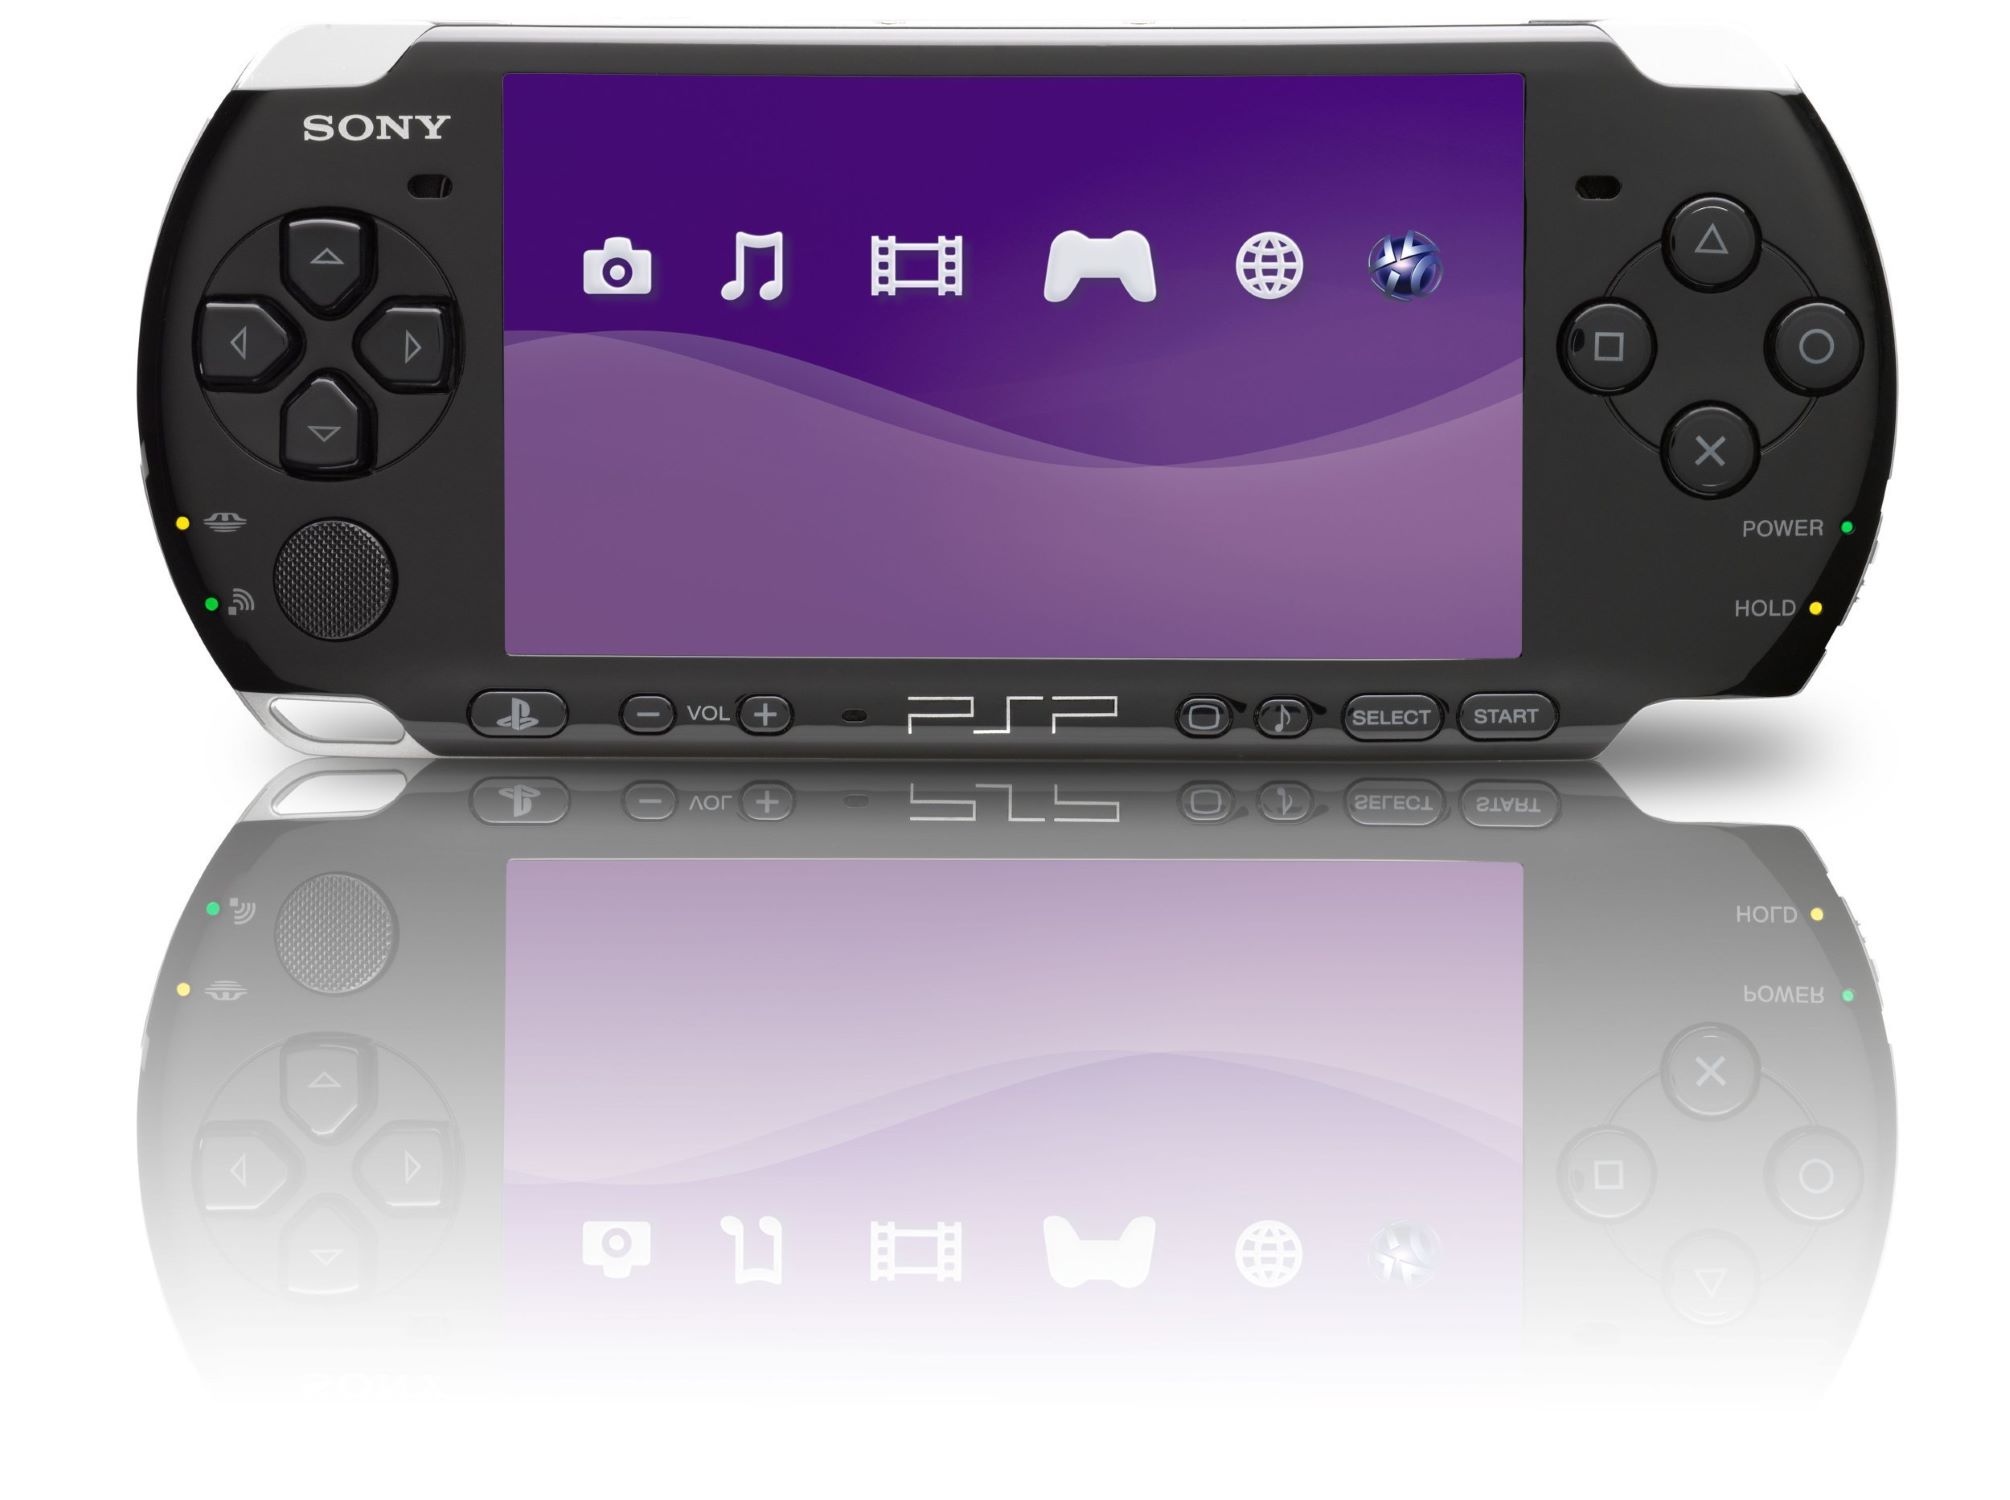 turning-your-psp-into-a-pc-gamepad-a-how-to-guide